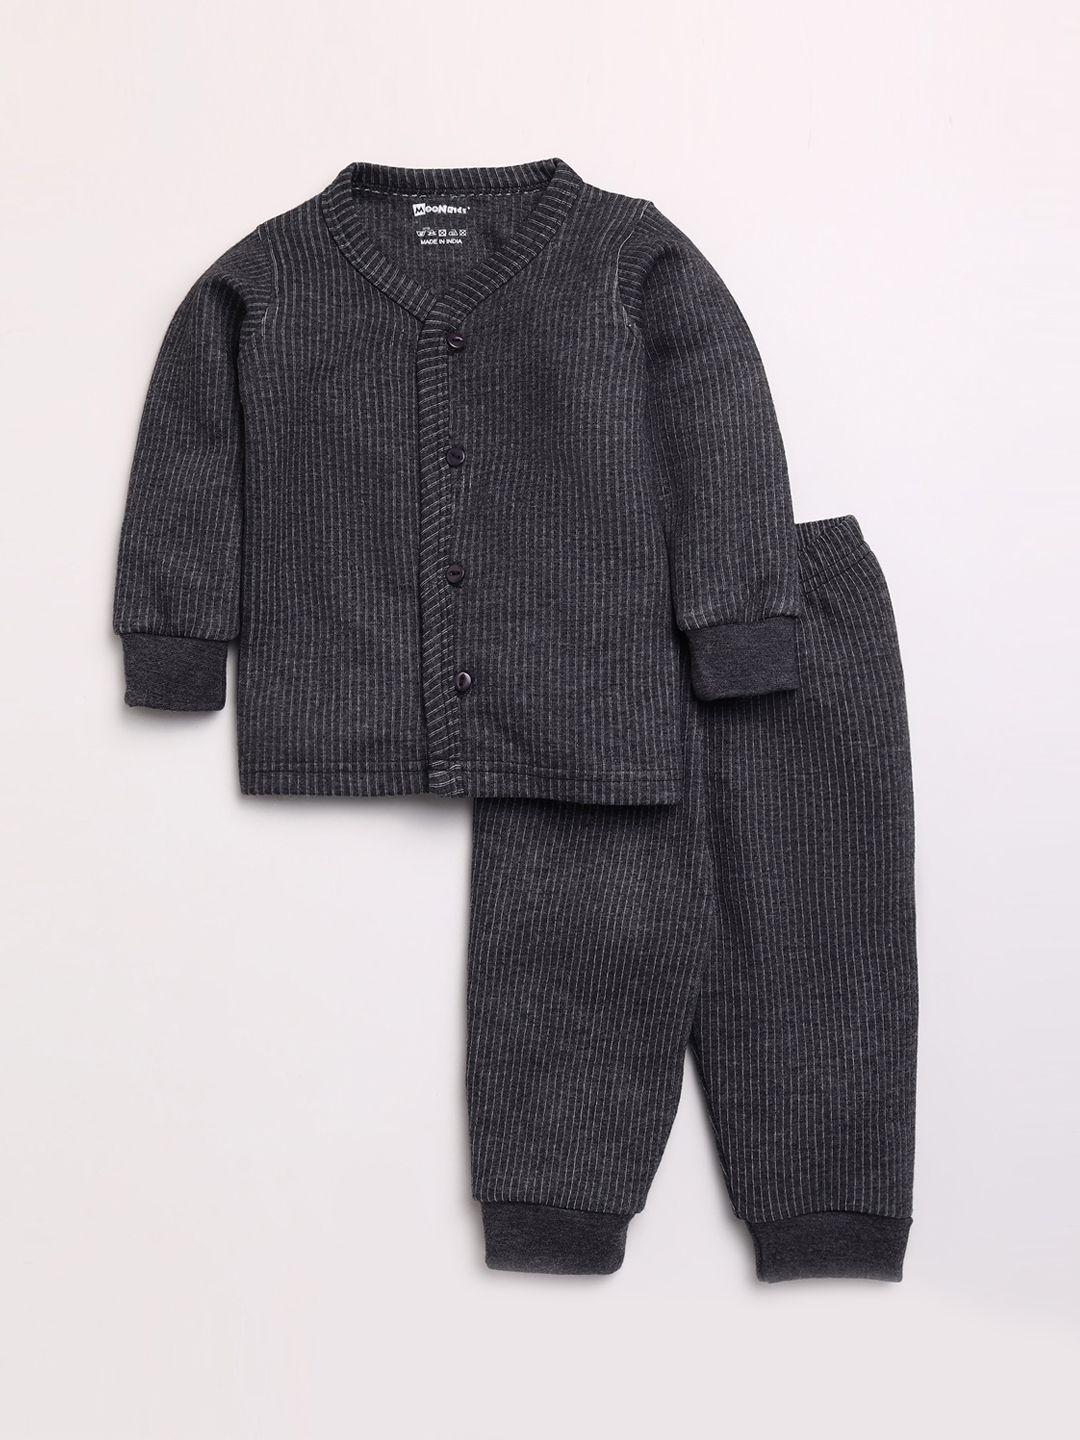 moonkids-boys-grey-solid-thermal-set